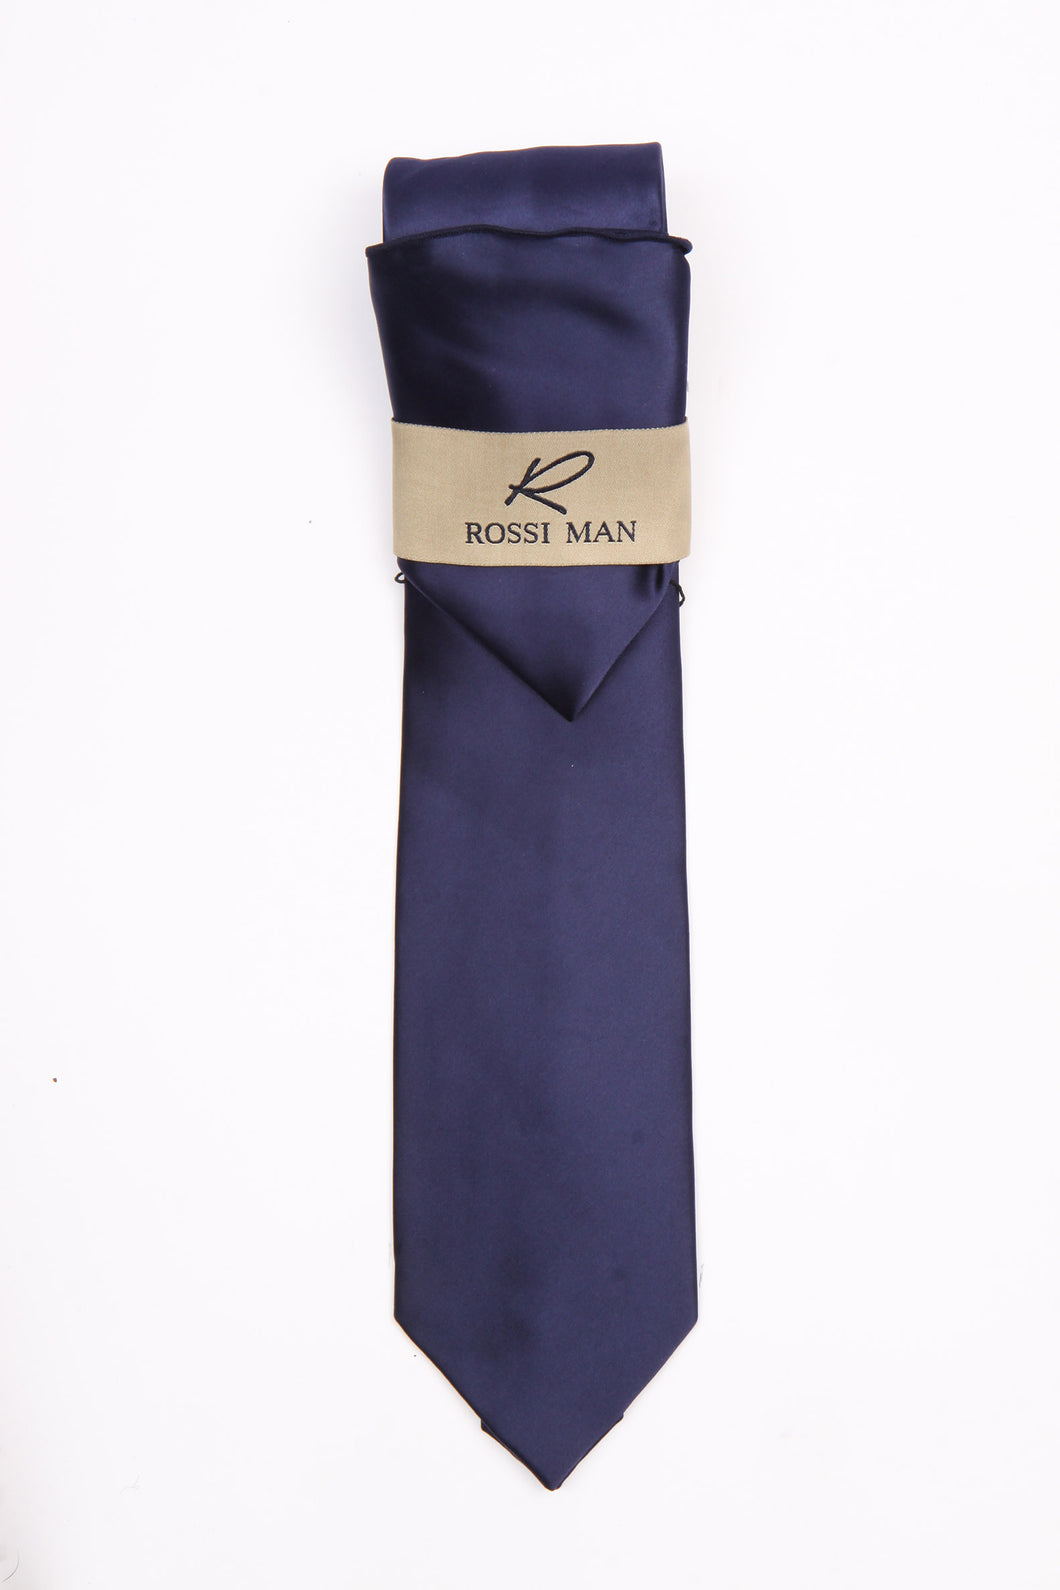 Rossi Man Tie and Pocket Round - RMR665-5